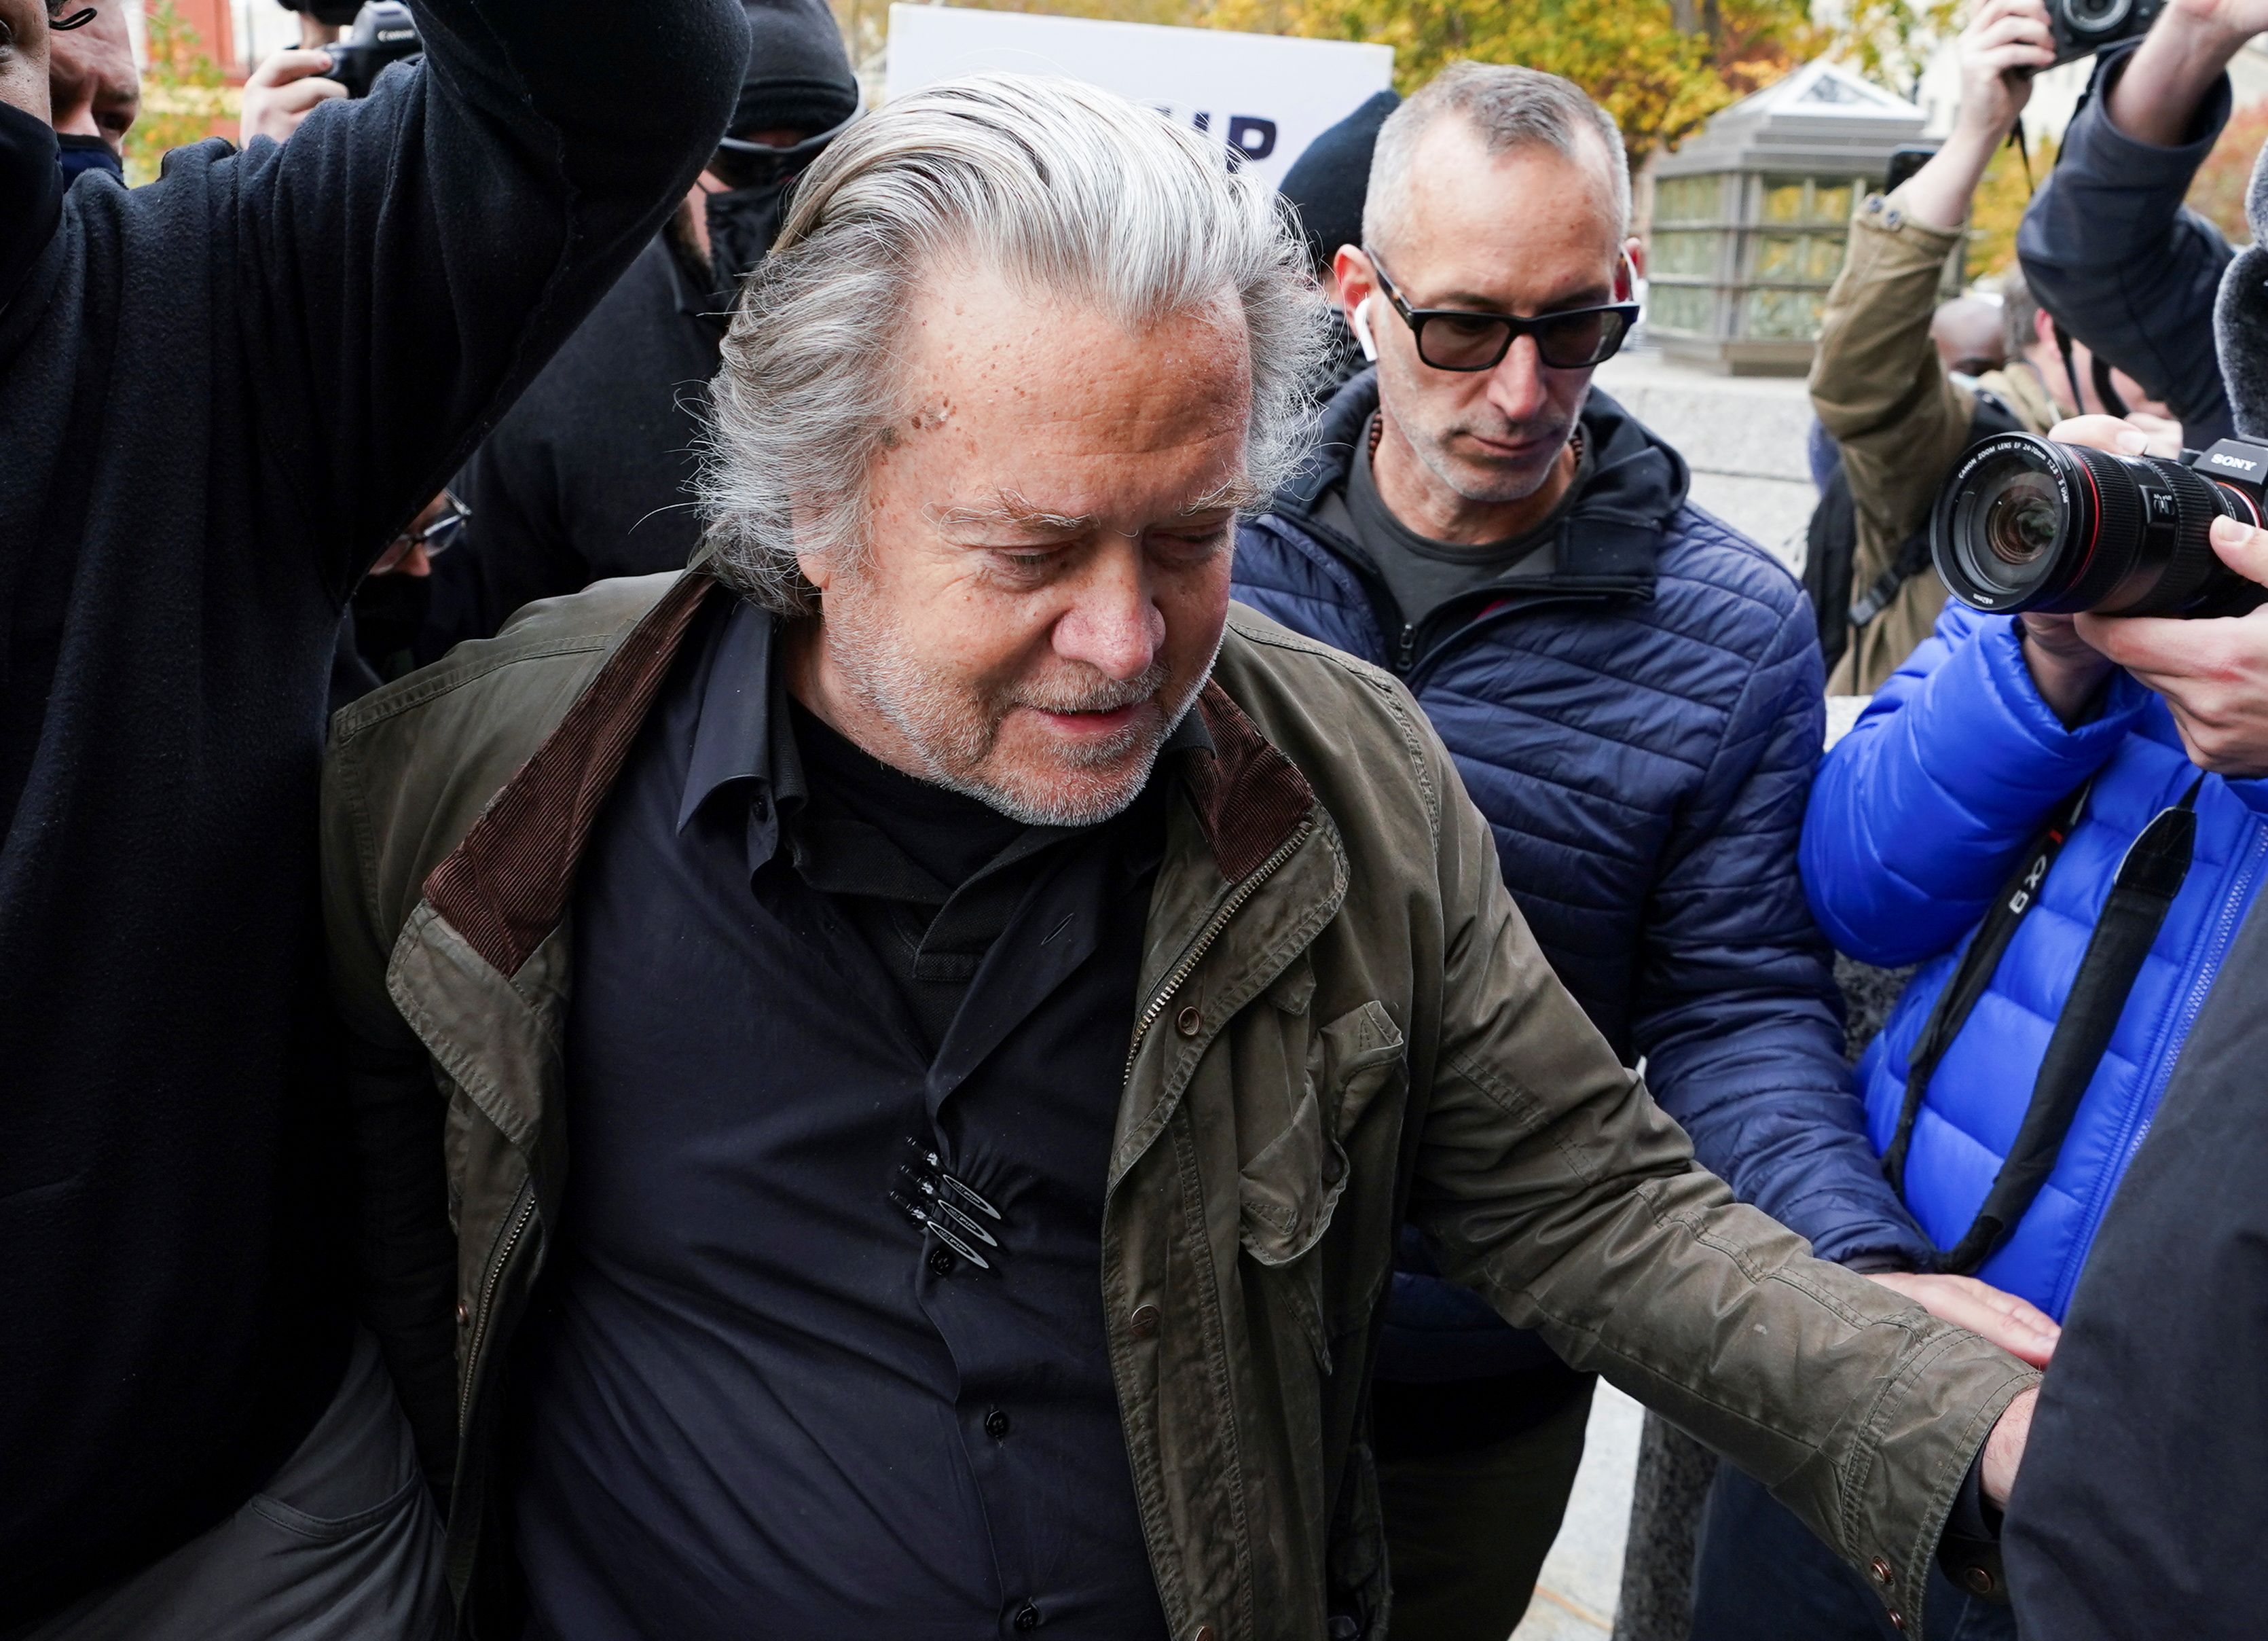 Steve Bannon indicted for refusal to comply with a congressional subpoena, in Washington